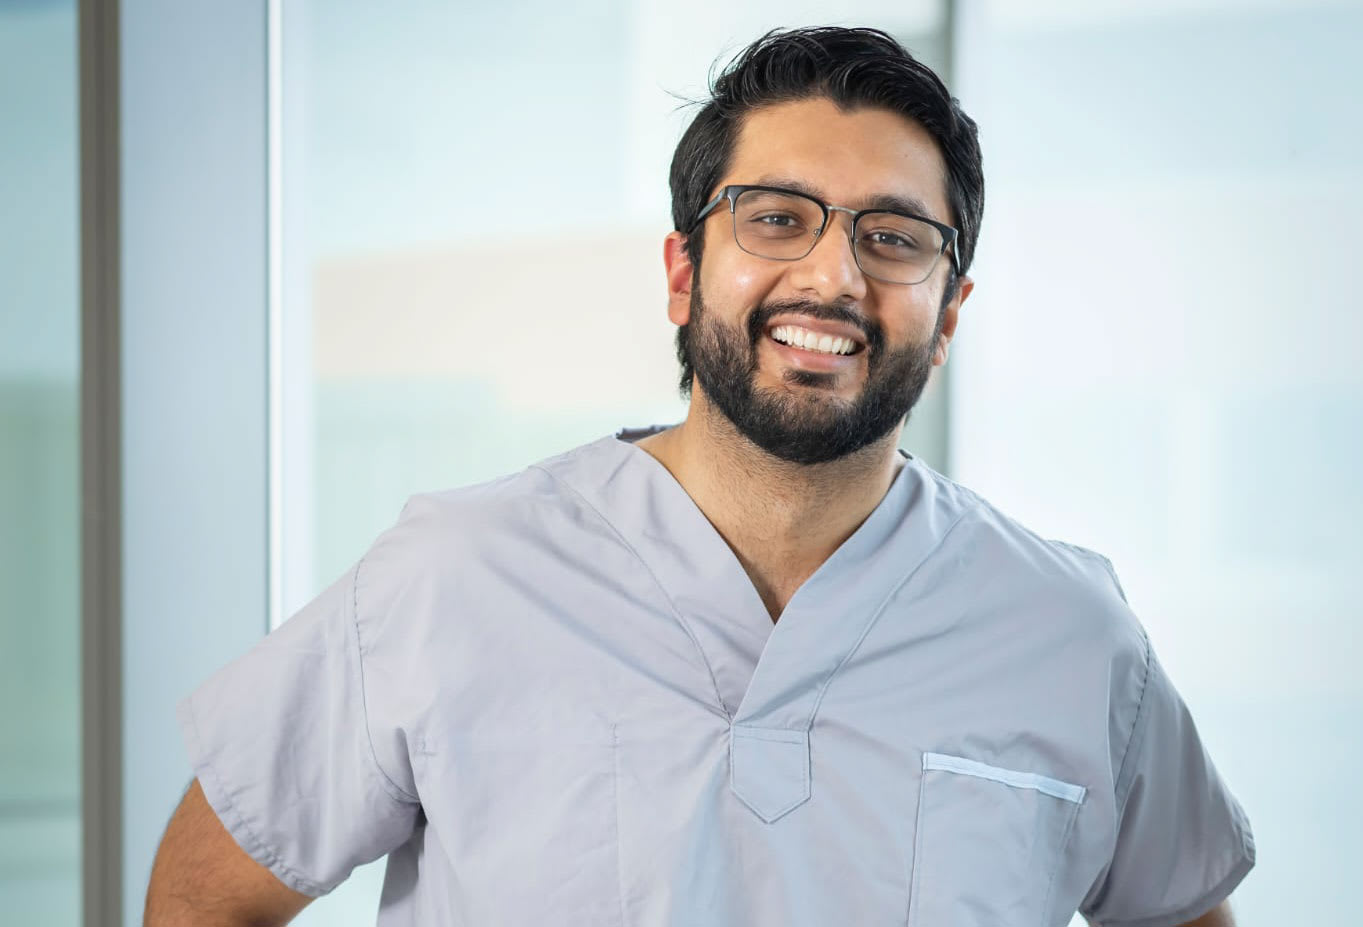 A Brown man dressed in scrubs and wearing glasses smiles for the camera